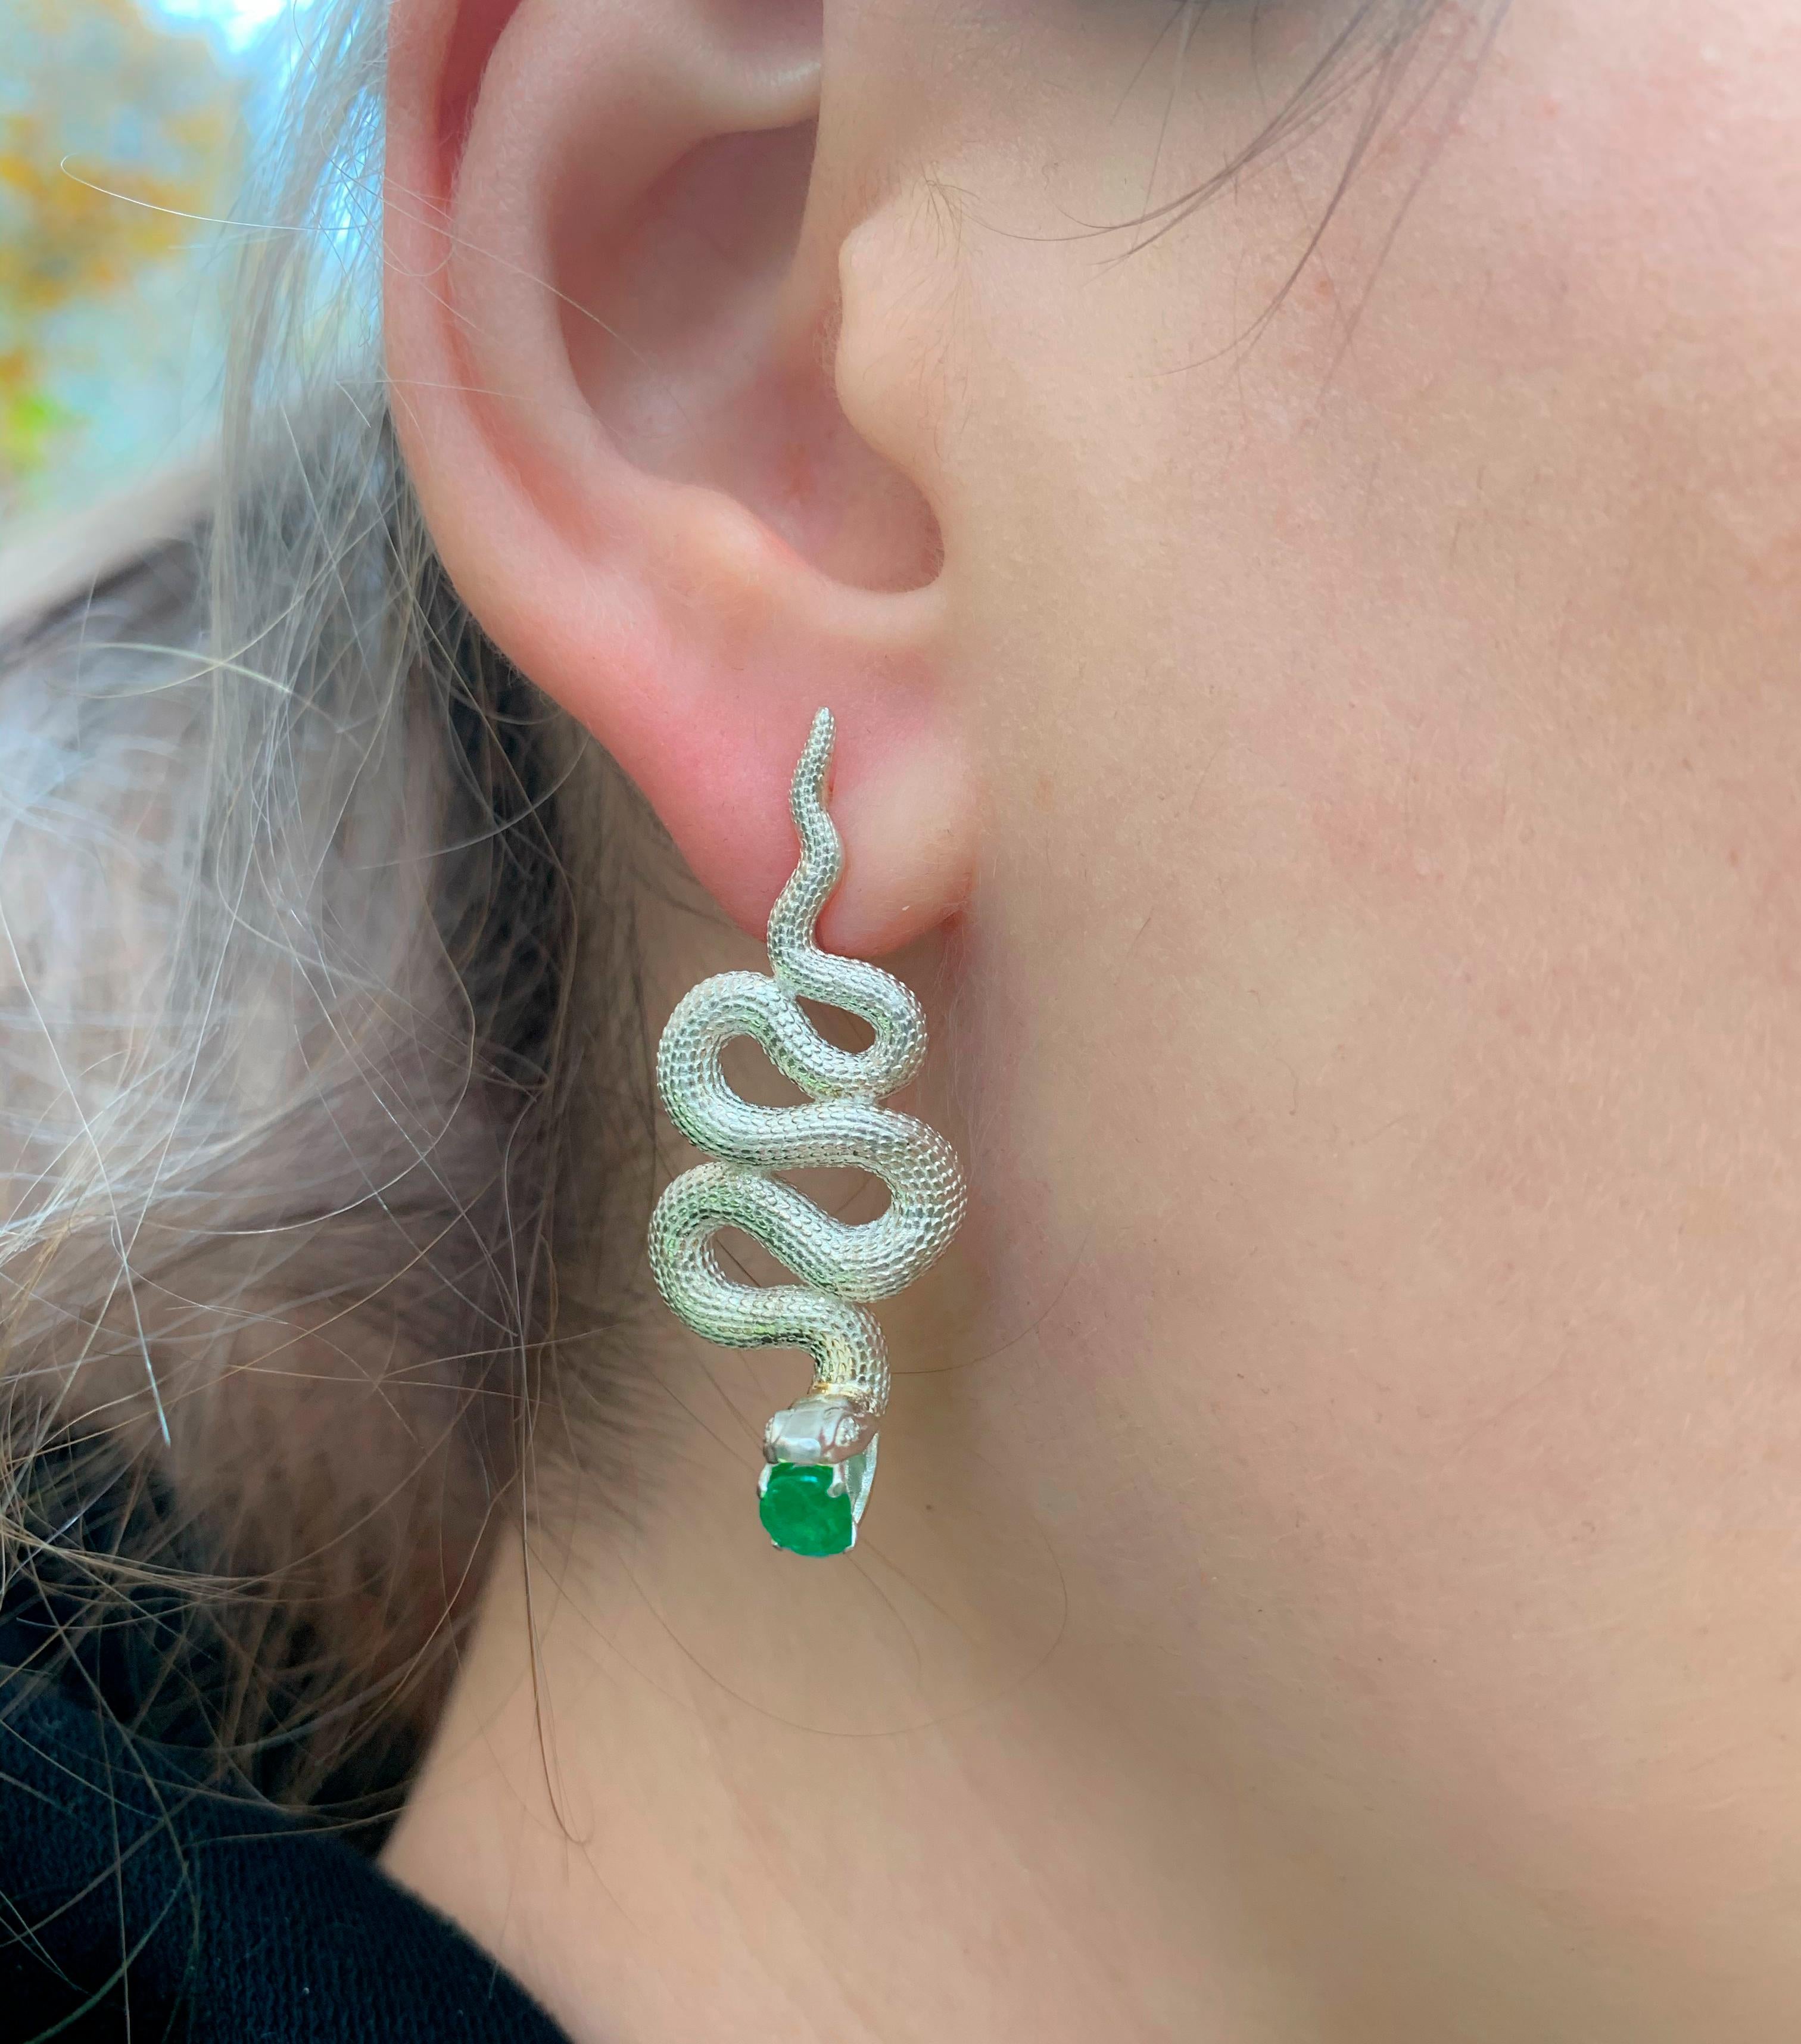 Massive snake earrings. 
Genuine emerald and diamond earrings. Two metal earrings: yellow gold and silver. Serpent Earrings for Women Large.

Earrings are made with two material: 14 kt yellow gold (1.3 g) - clasp and 925 purity silver - other parts